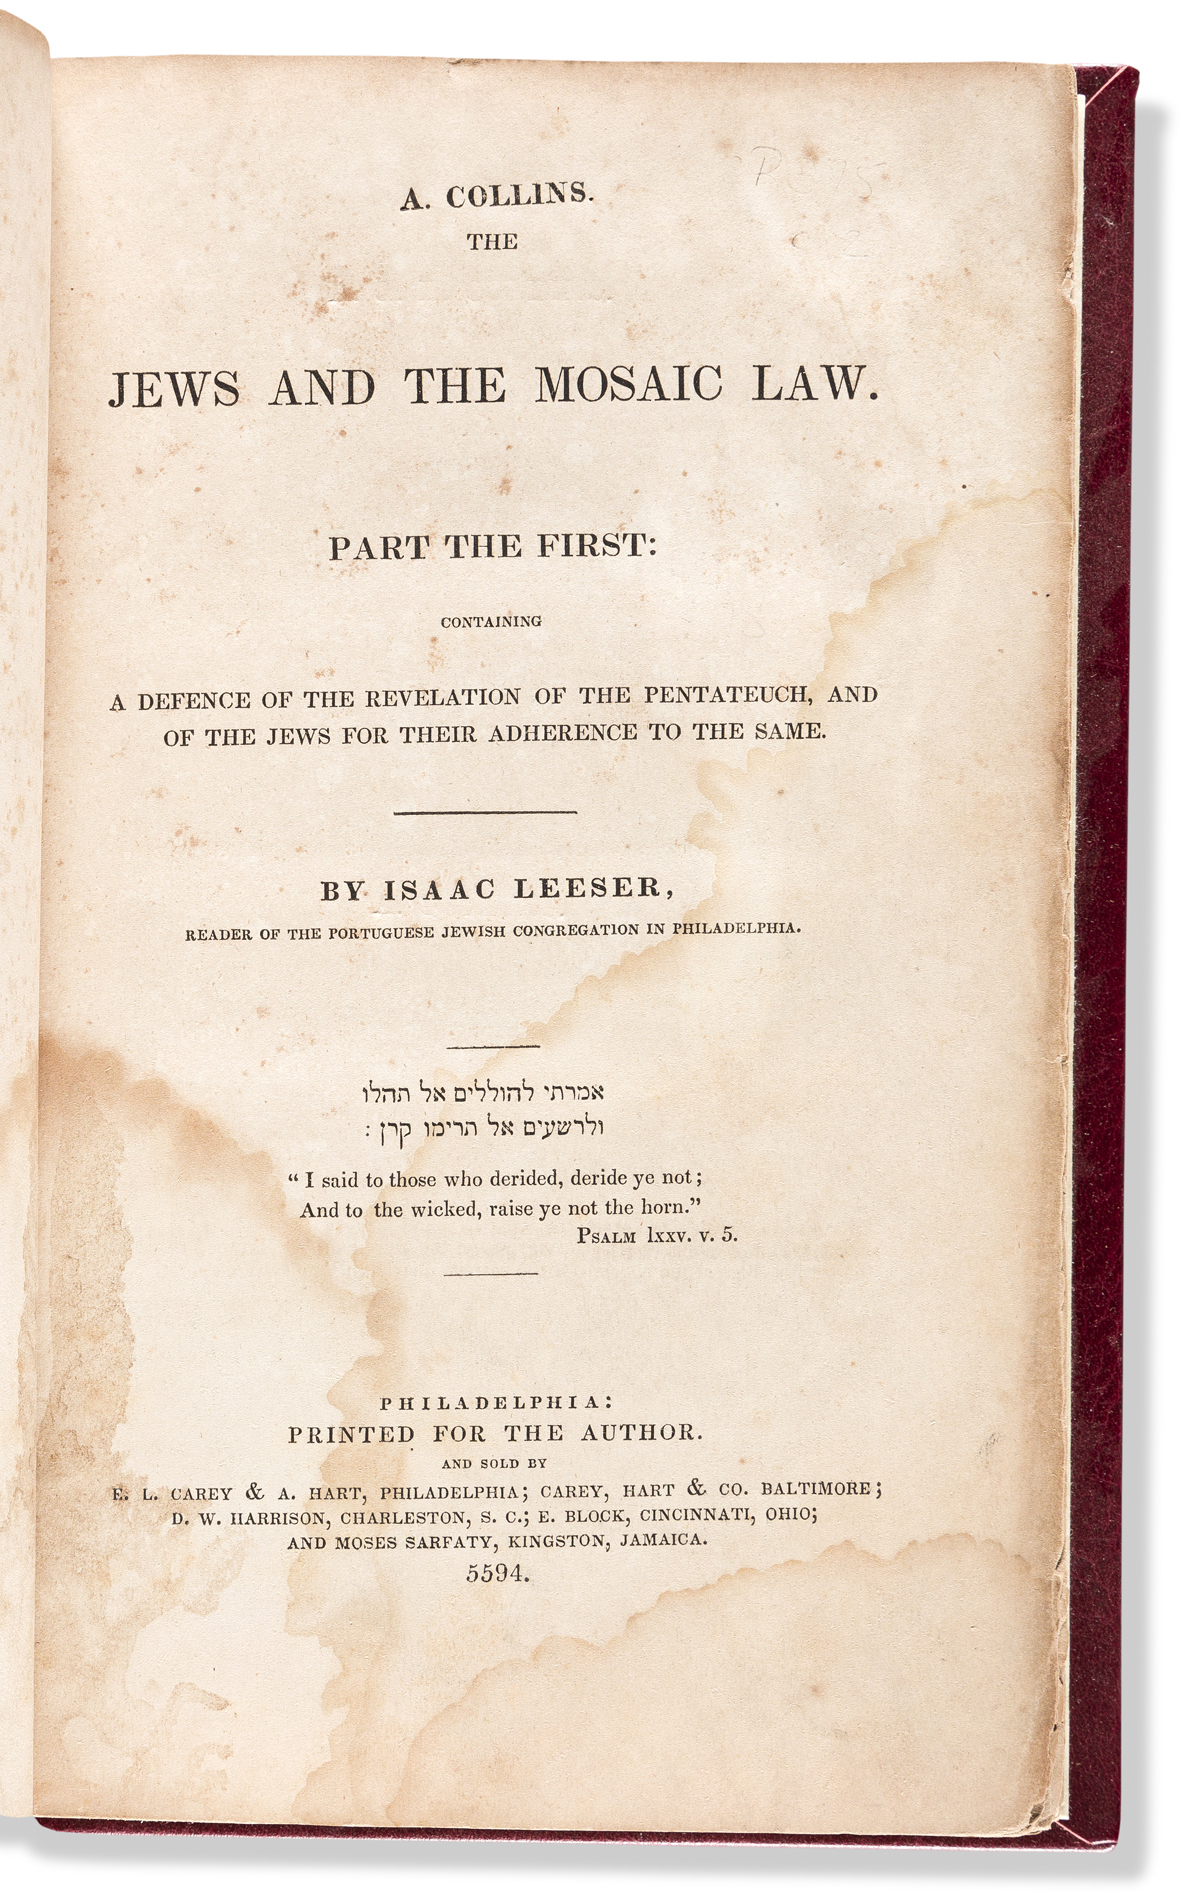 (JUDAICA.) Isaac Leeser. The Jews and the Mosaic Law.